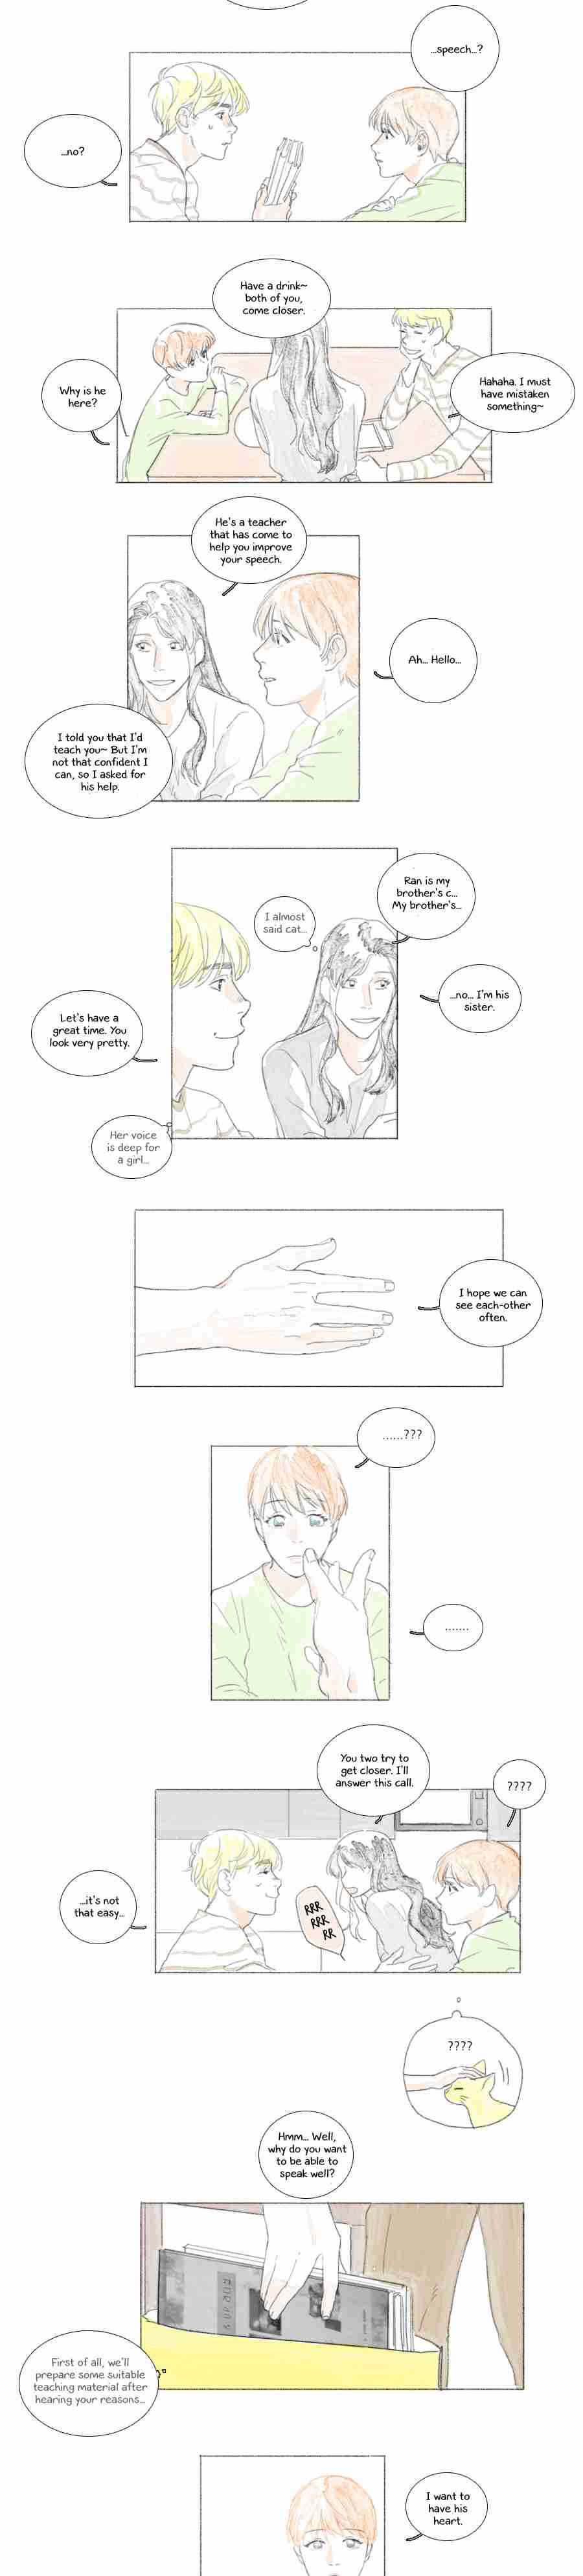 Catboy Catday Ch. 47 Process